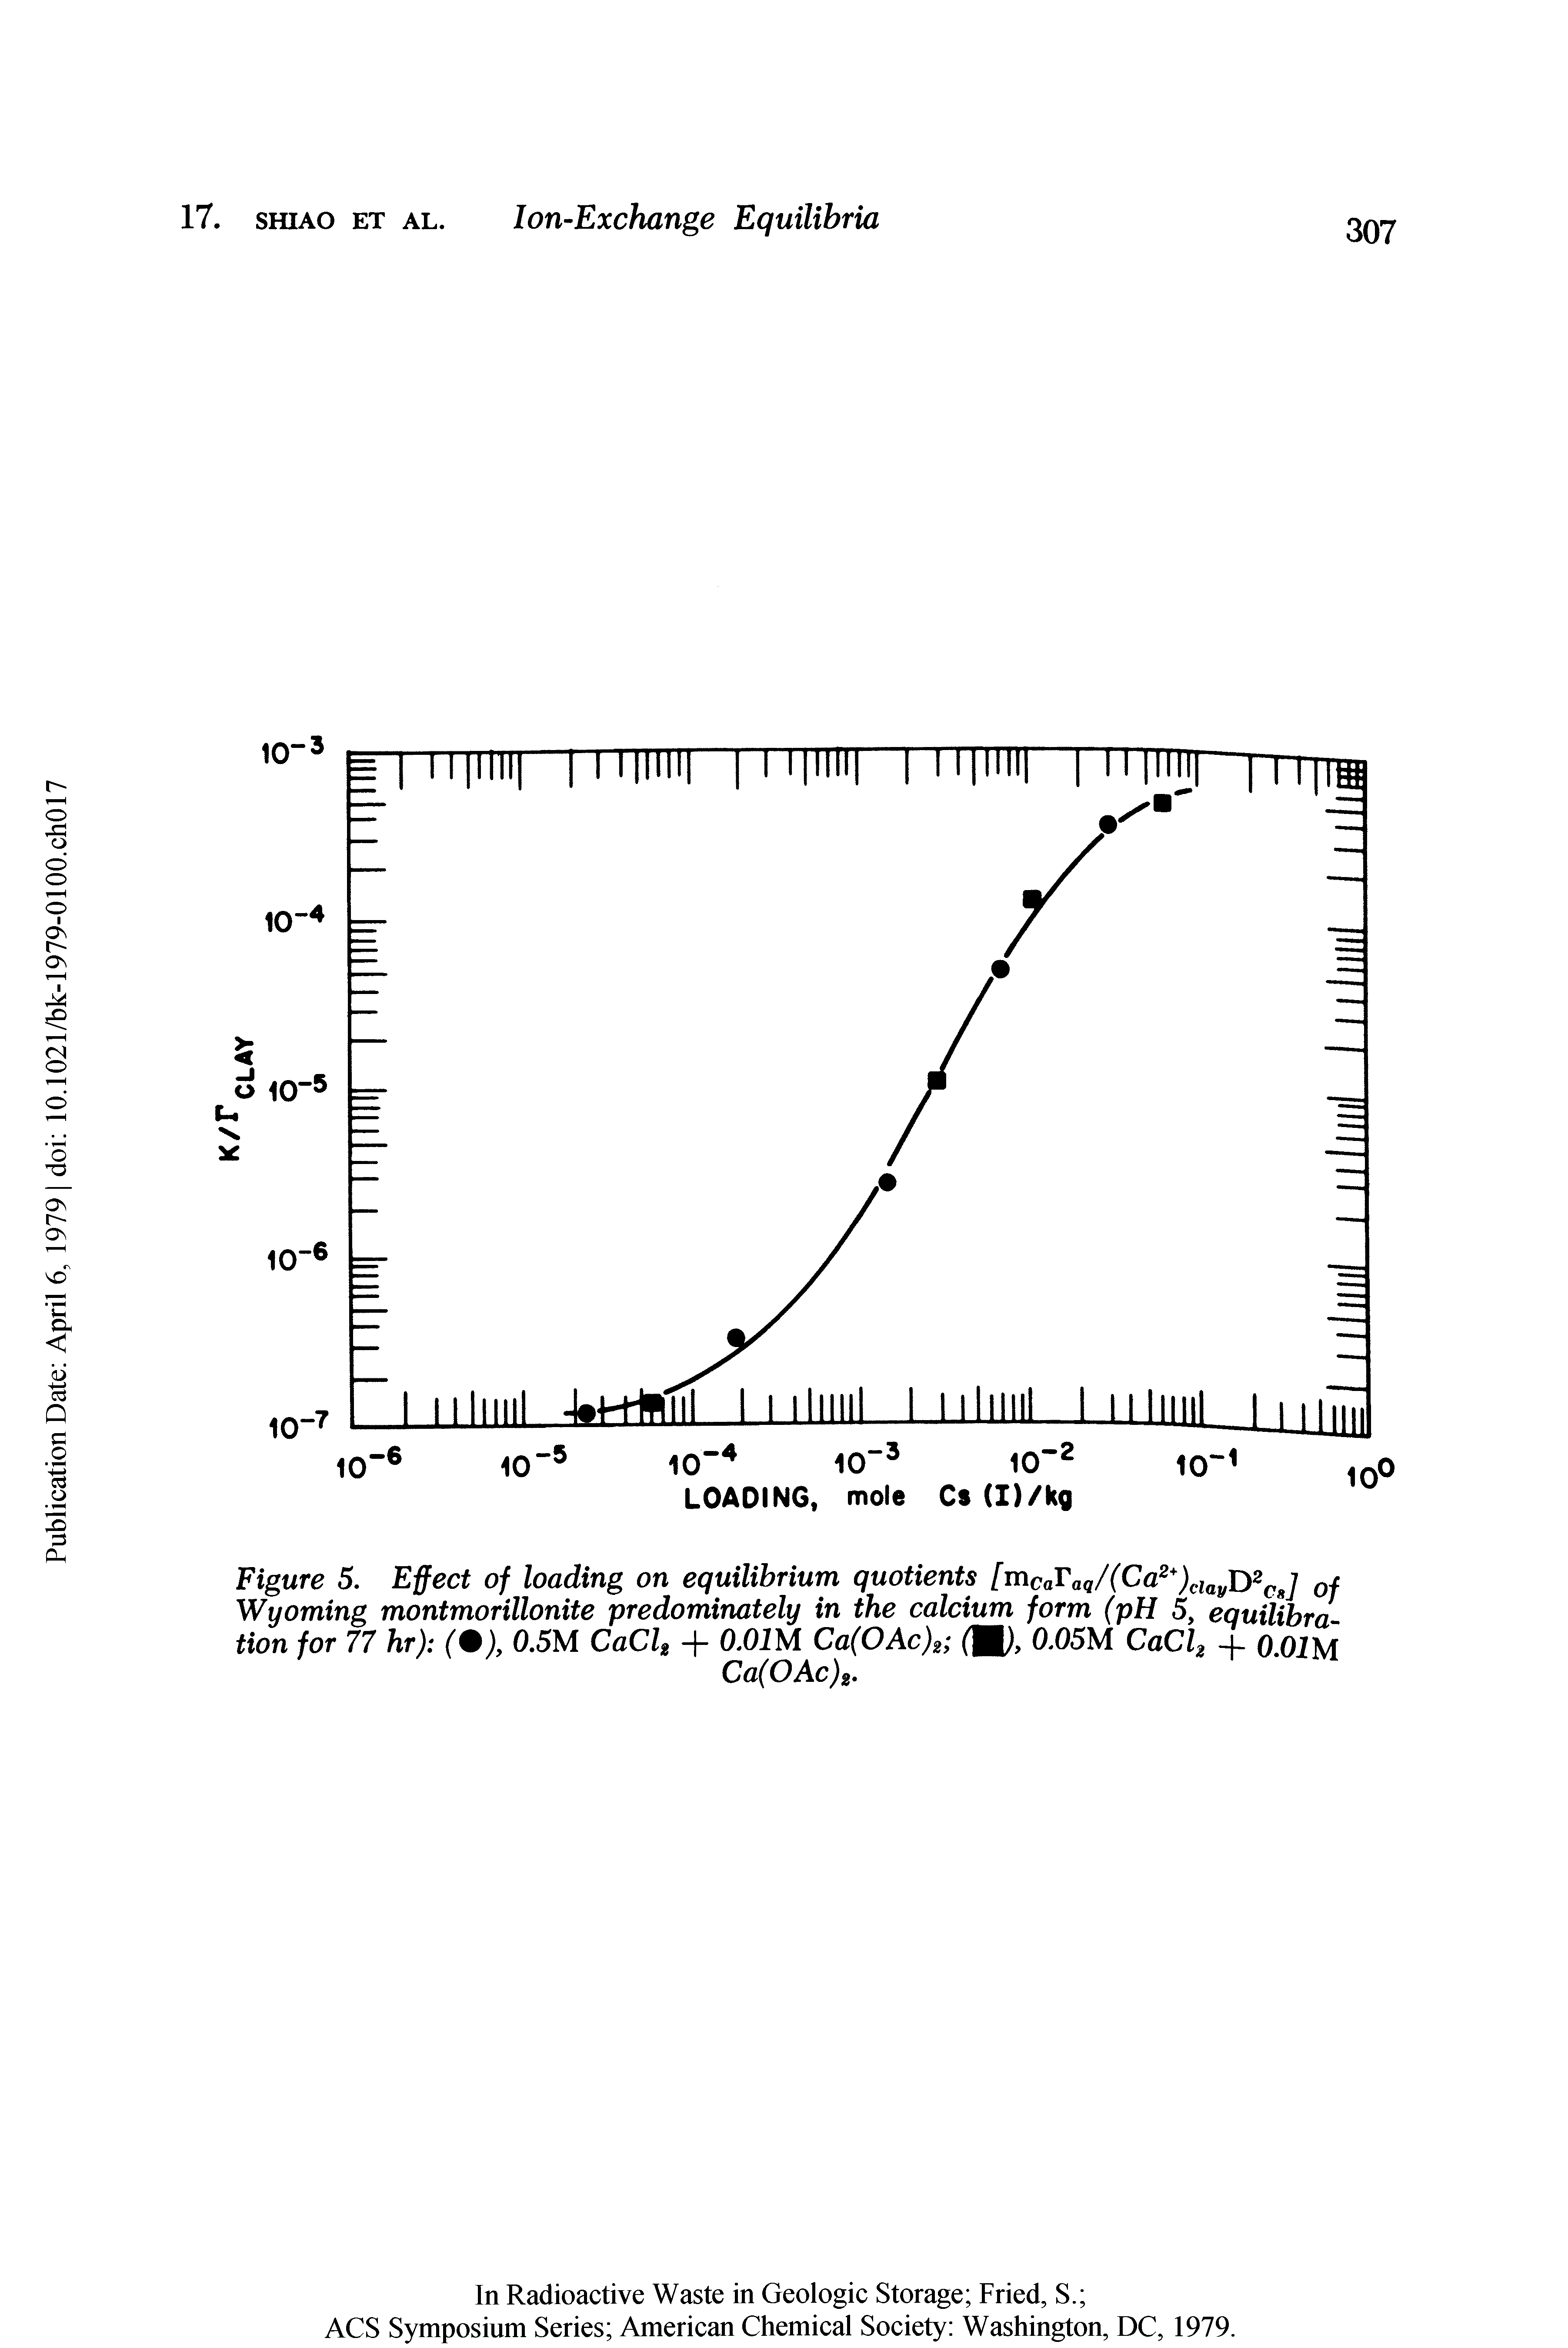 Figure 5. Effect of loading on equilibrium quotients [mcaFaq/(Ca )ciayD cJ of Wyoming montmorillonite predominately in the calcium form (pH 5, equilibration for 77 hr) C), 0.5M CaCl, + O.OIM Ca(OAc)2 O, 0.05M CaCl, + O.OIM Ca(OAc)i.